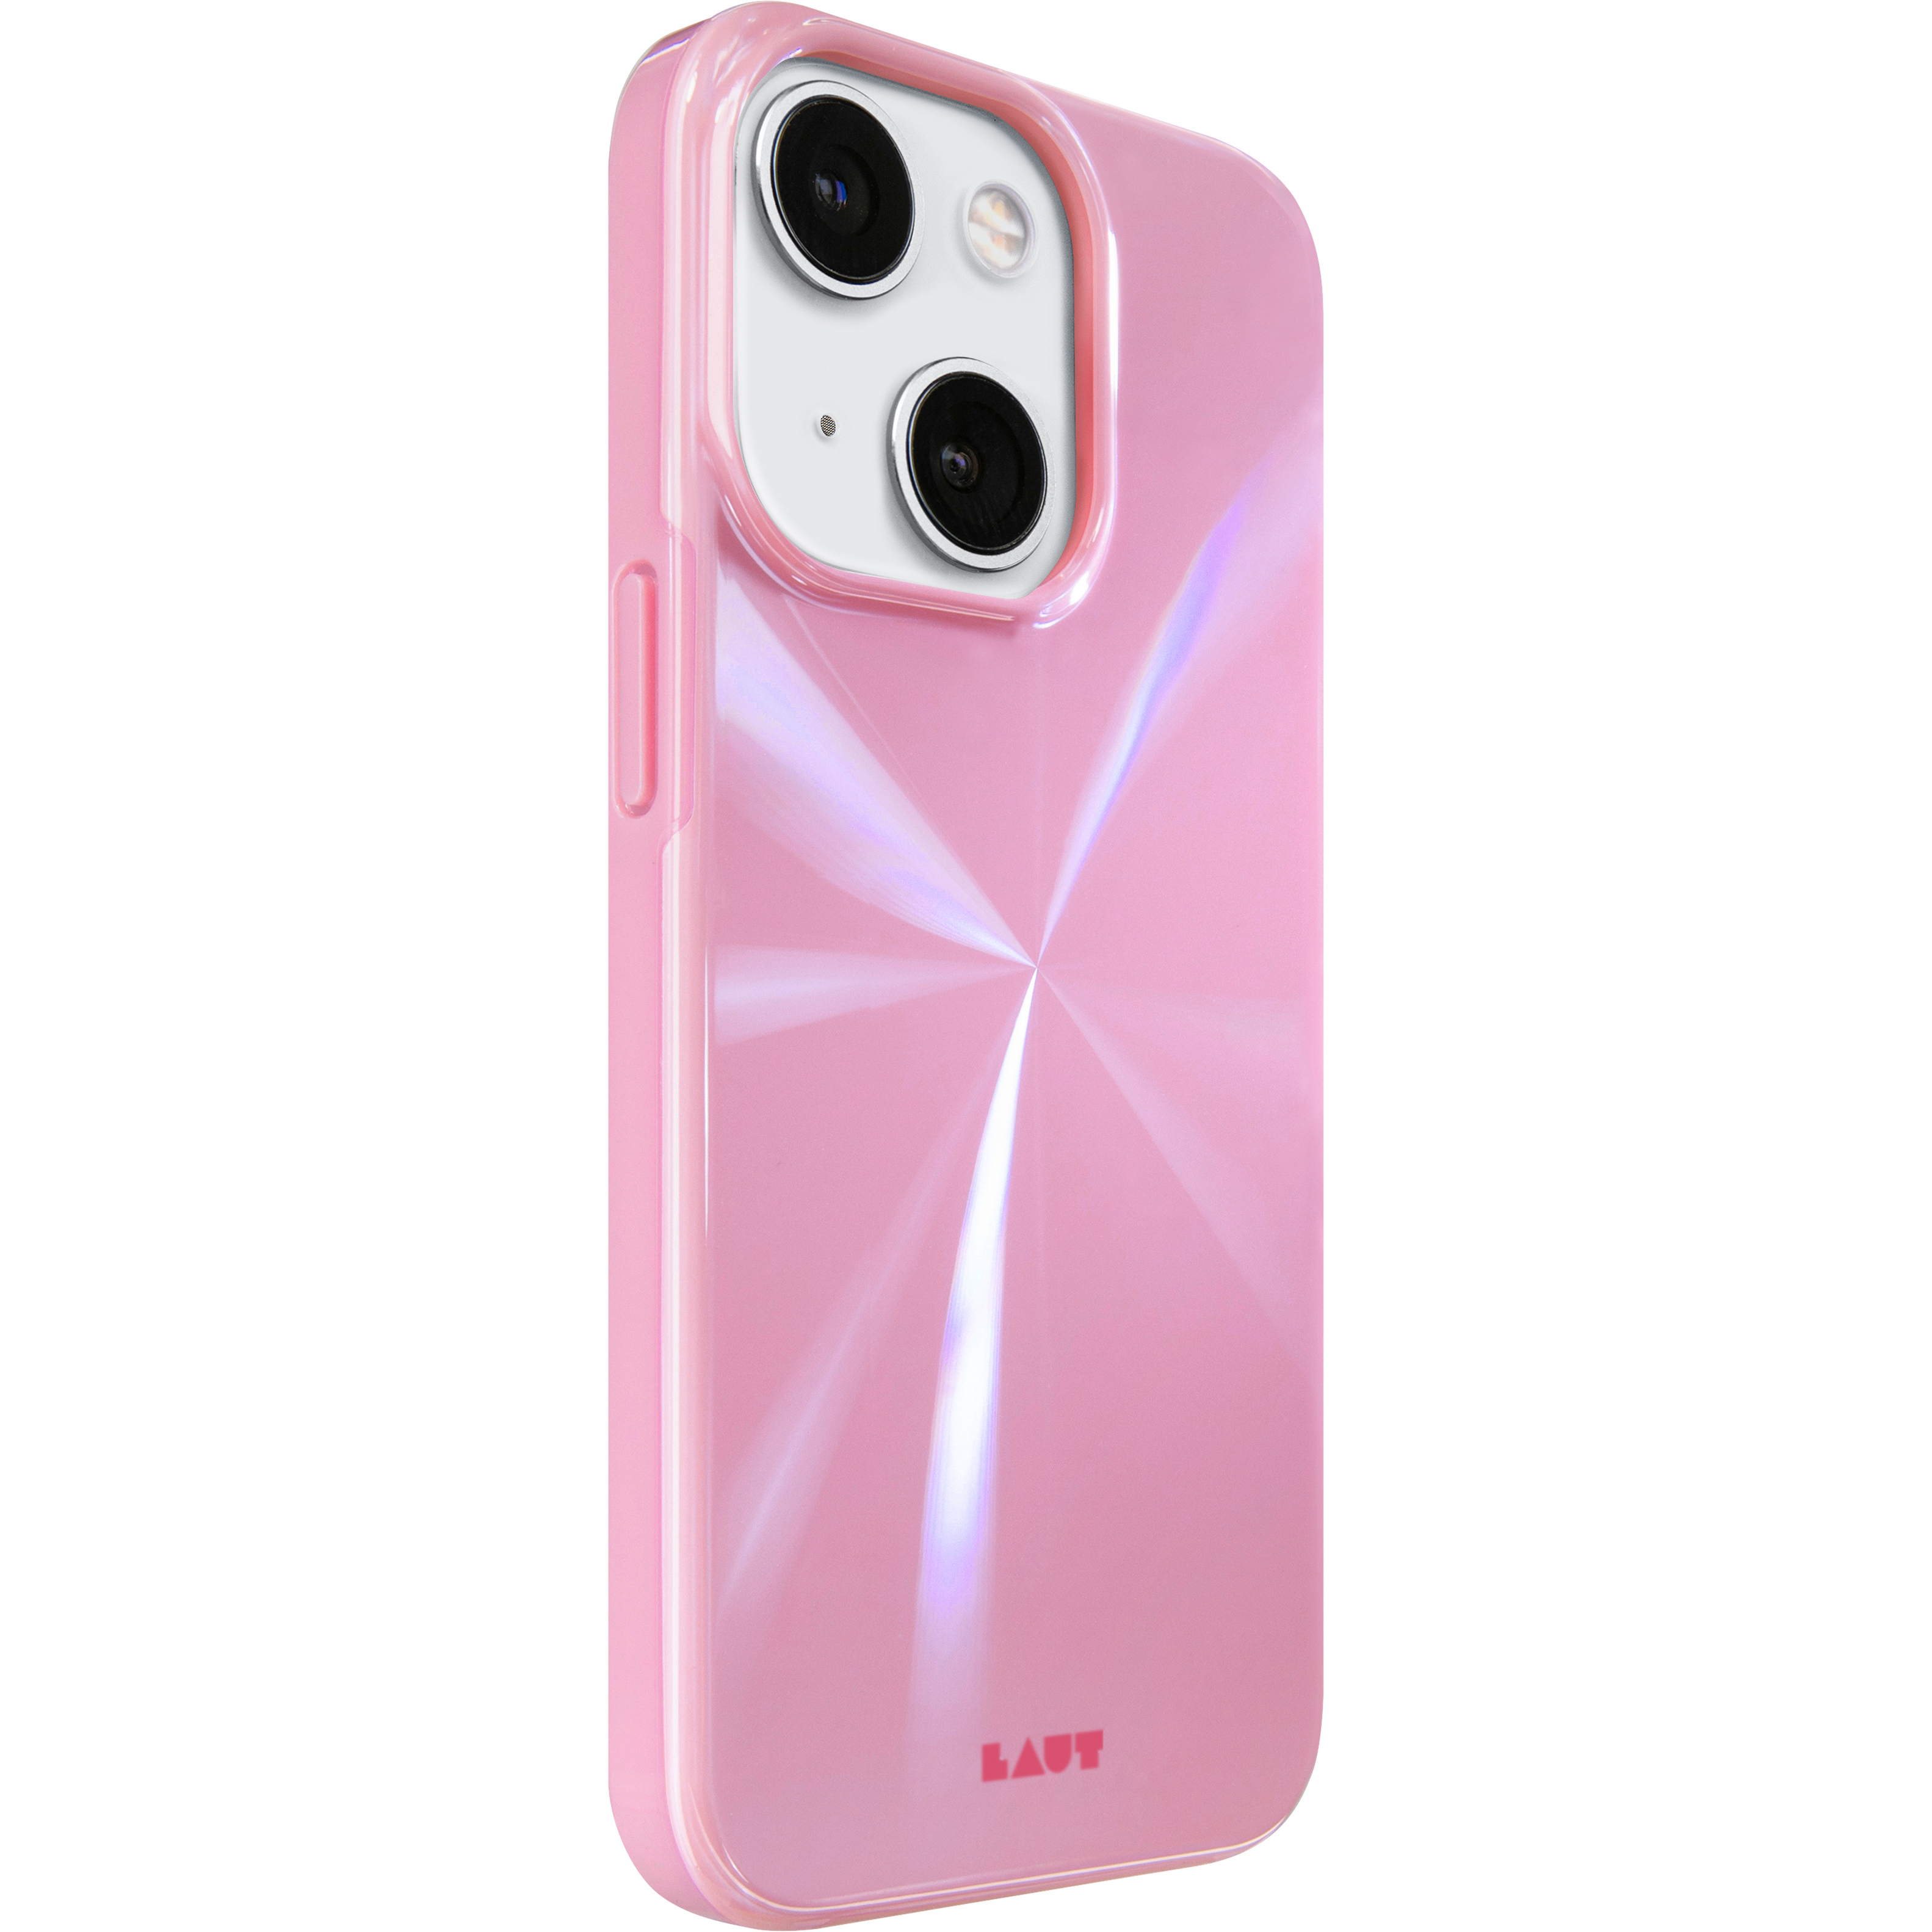 LAUT IPHONE Backcover, APPLE, PRO, Huex PINK 14 Reflect,